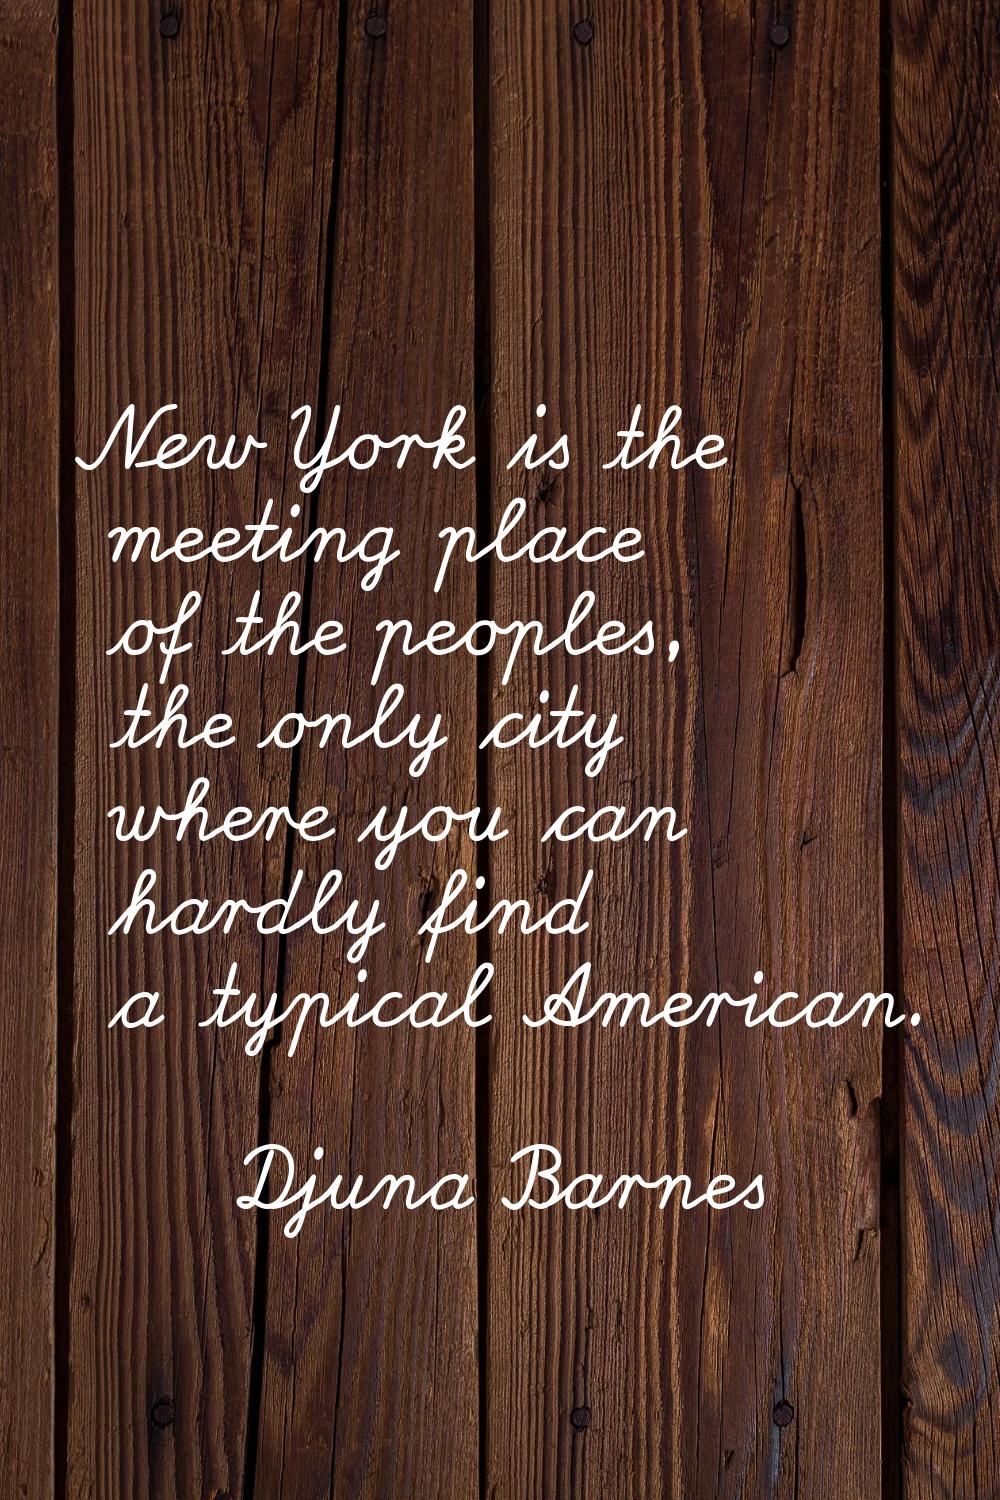 New York is the meeting place of the peoples, the only city where you can hardly find a typical Ame